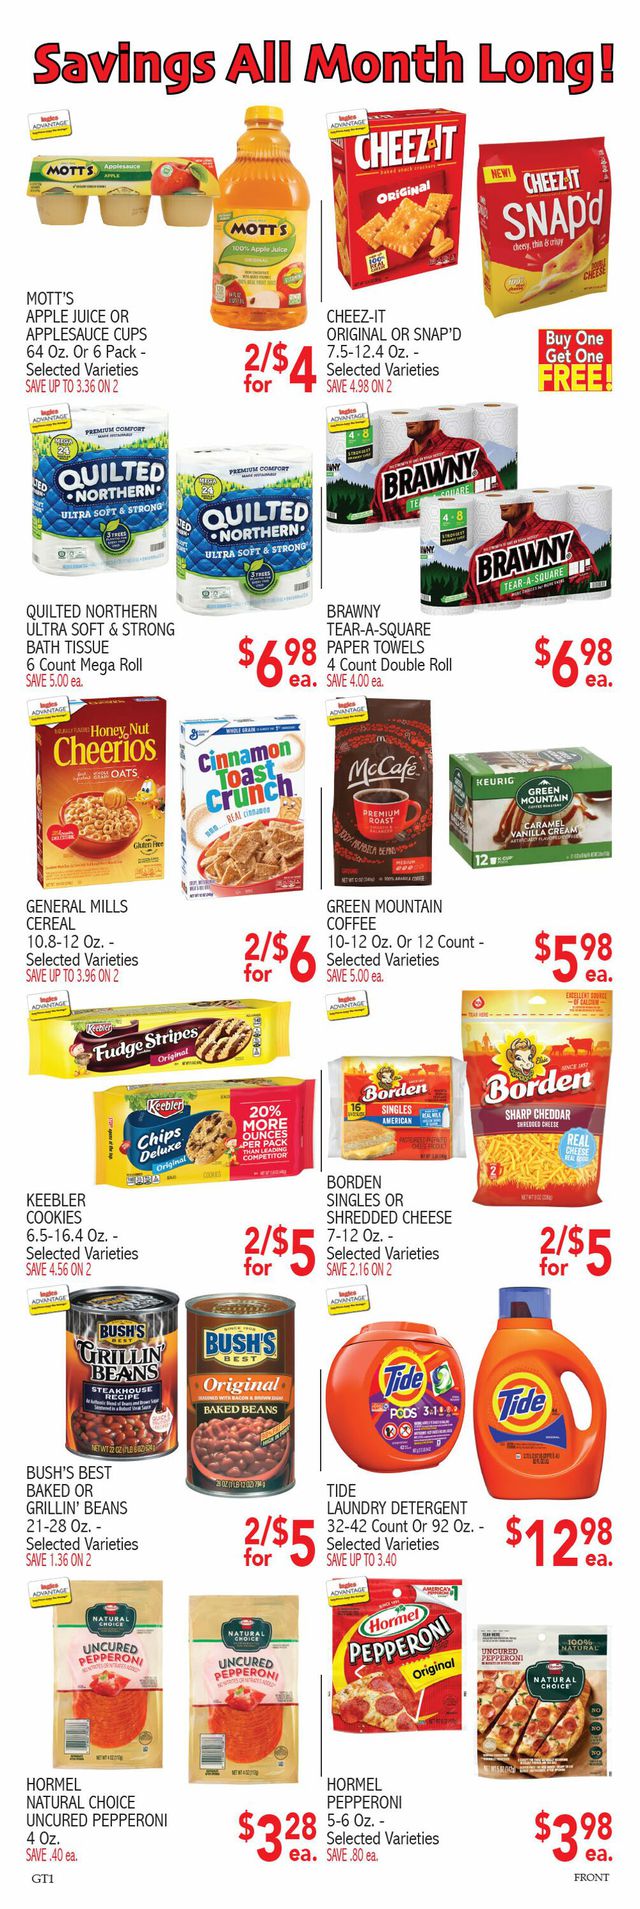 Ingles Ad from 08/31/2022